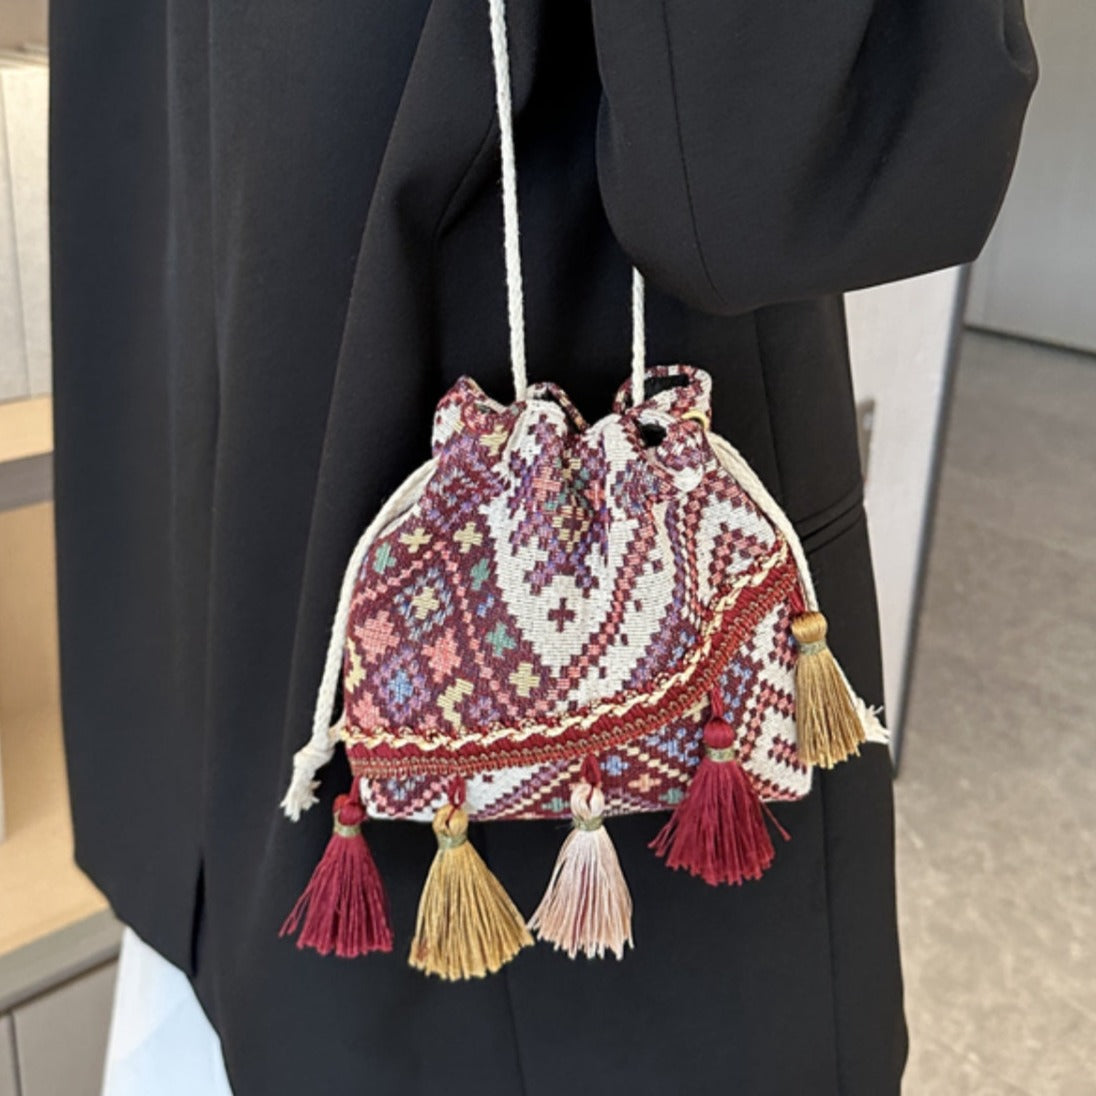 Wine drawstring pouch bag with colorful geometric patterns and playful tassel accents.